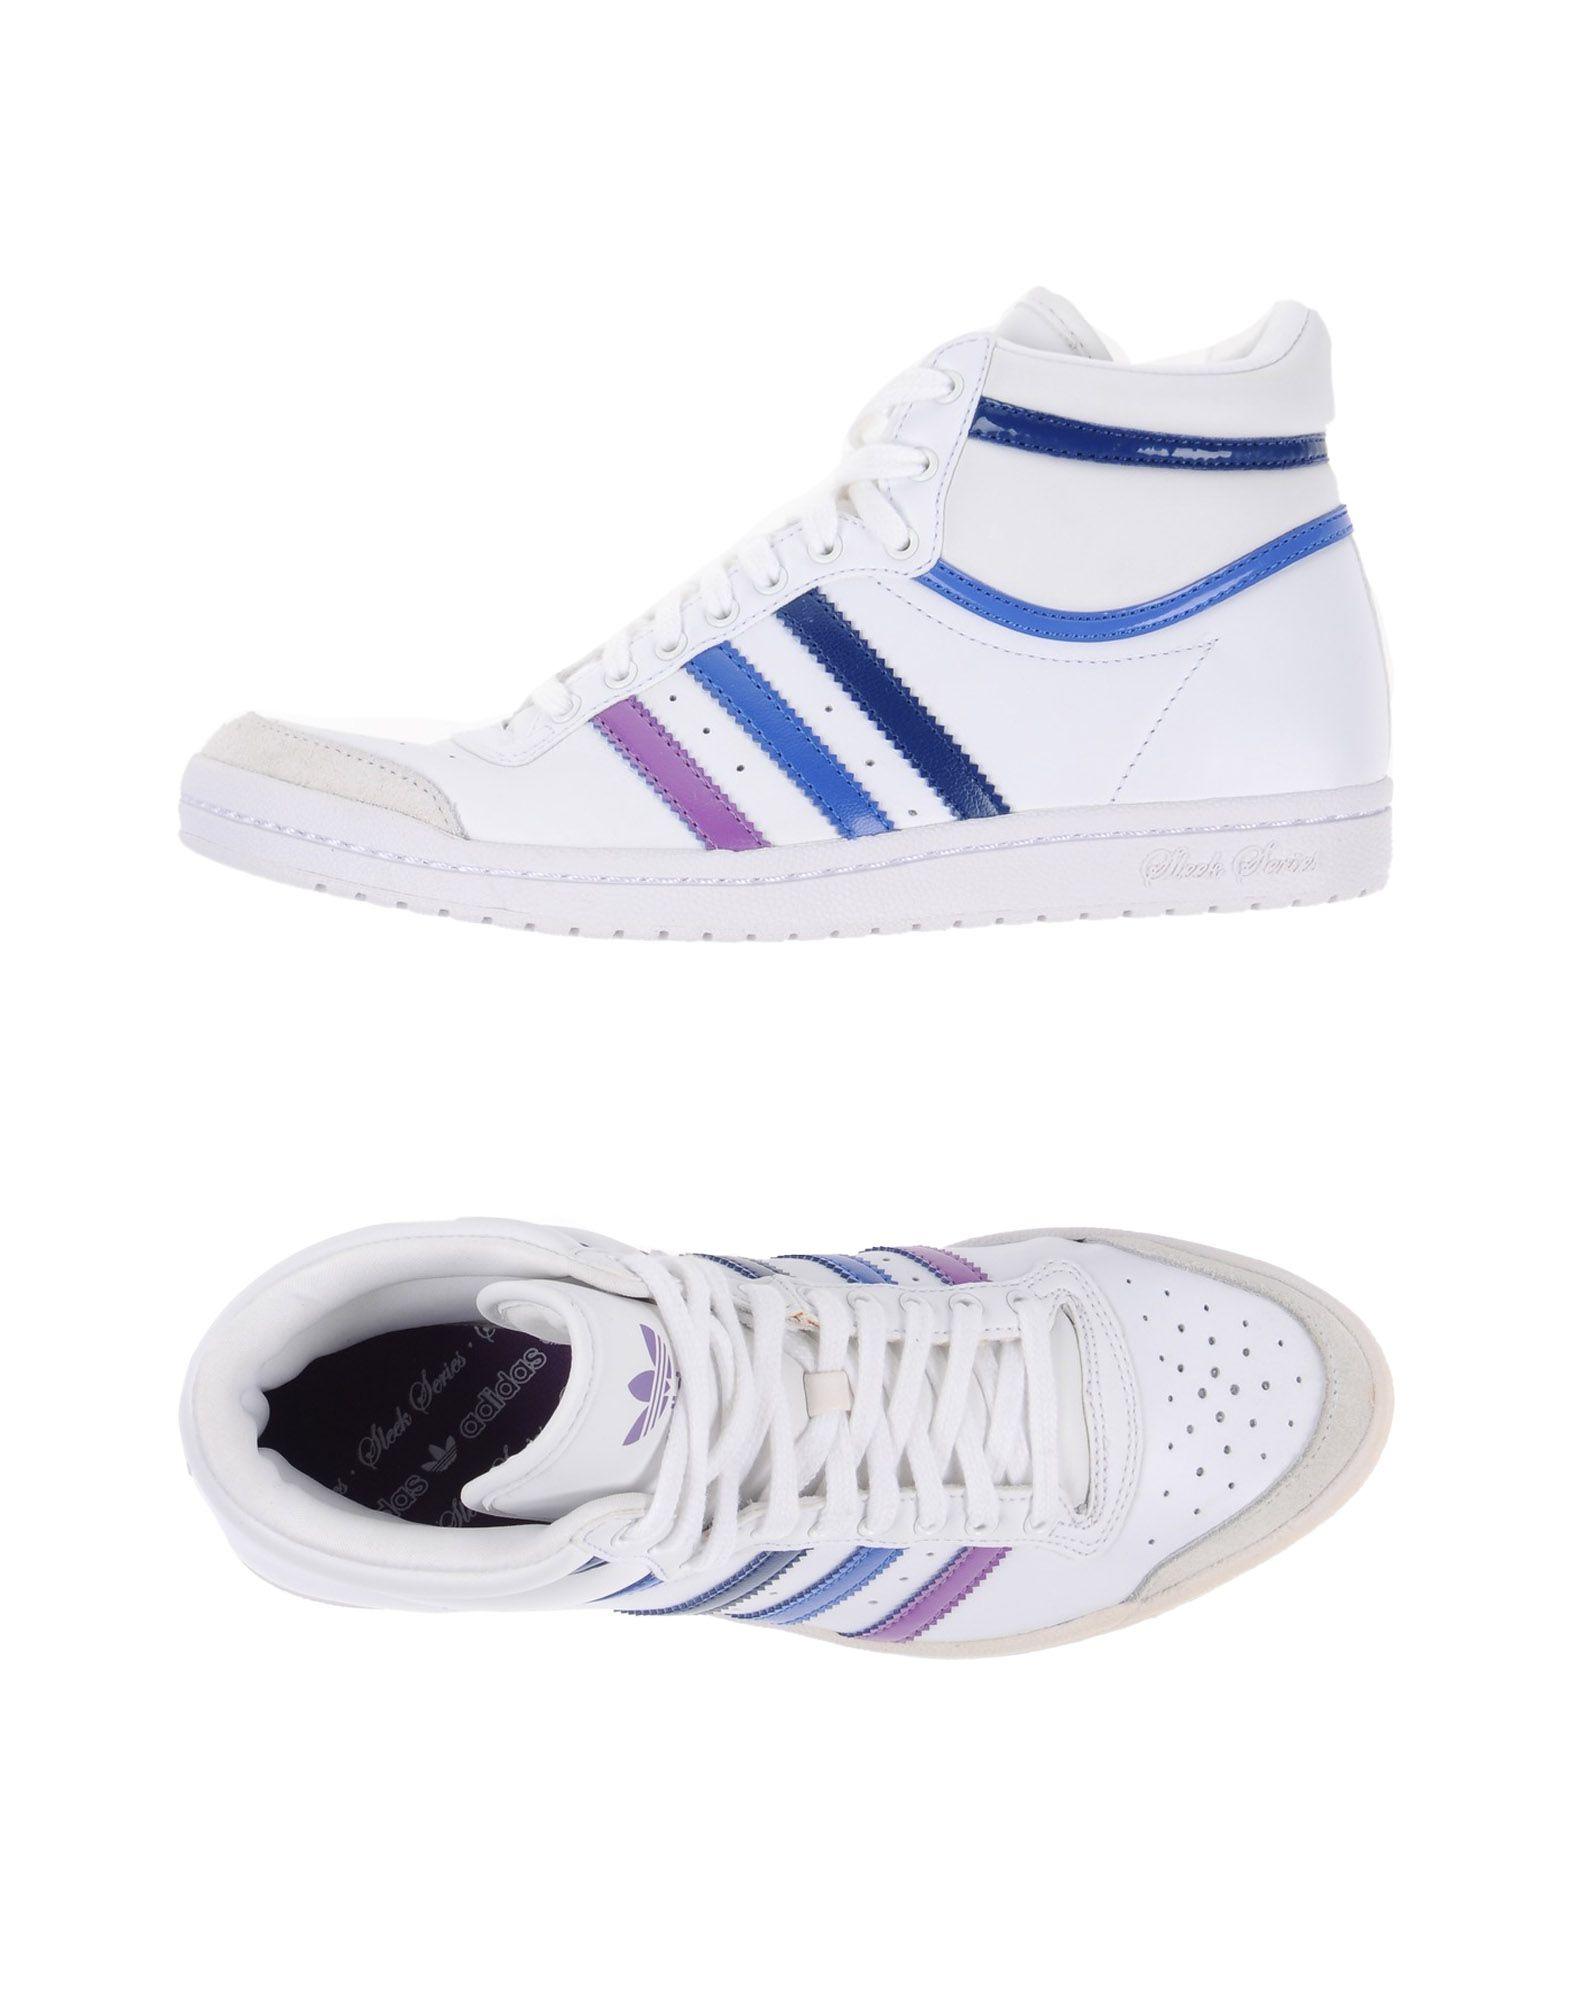 Lyst - Adidas Originals High-tops & Sneakers in White